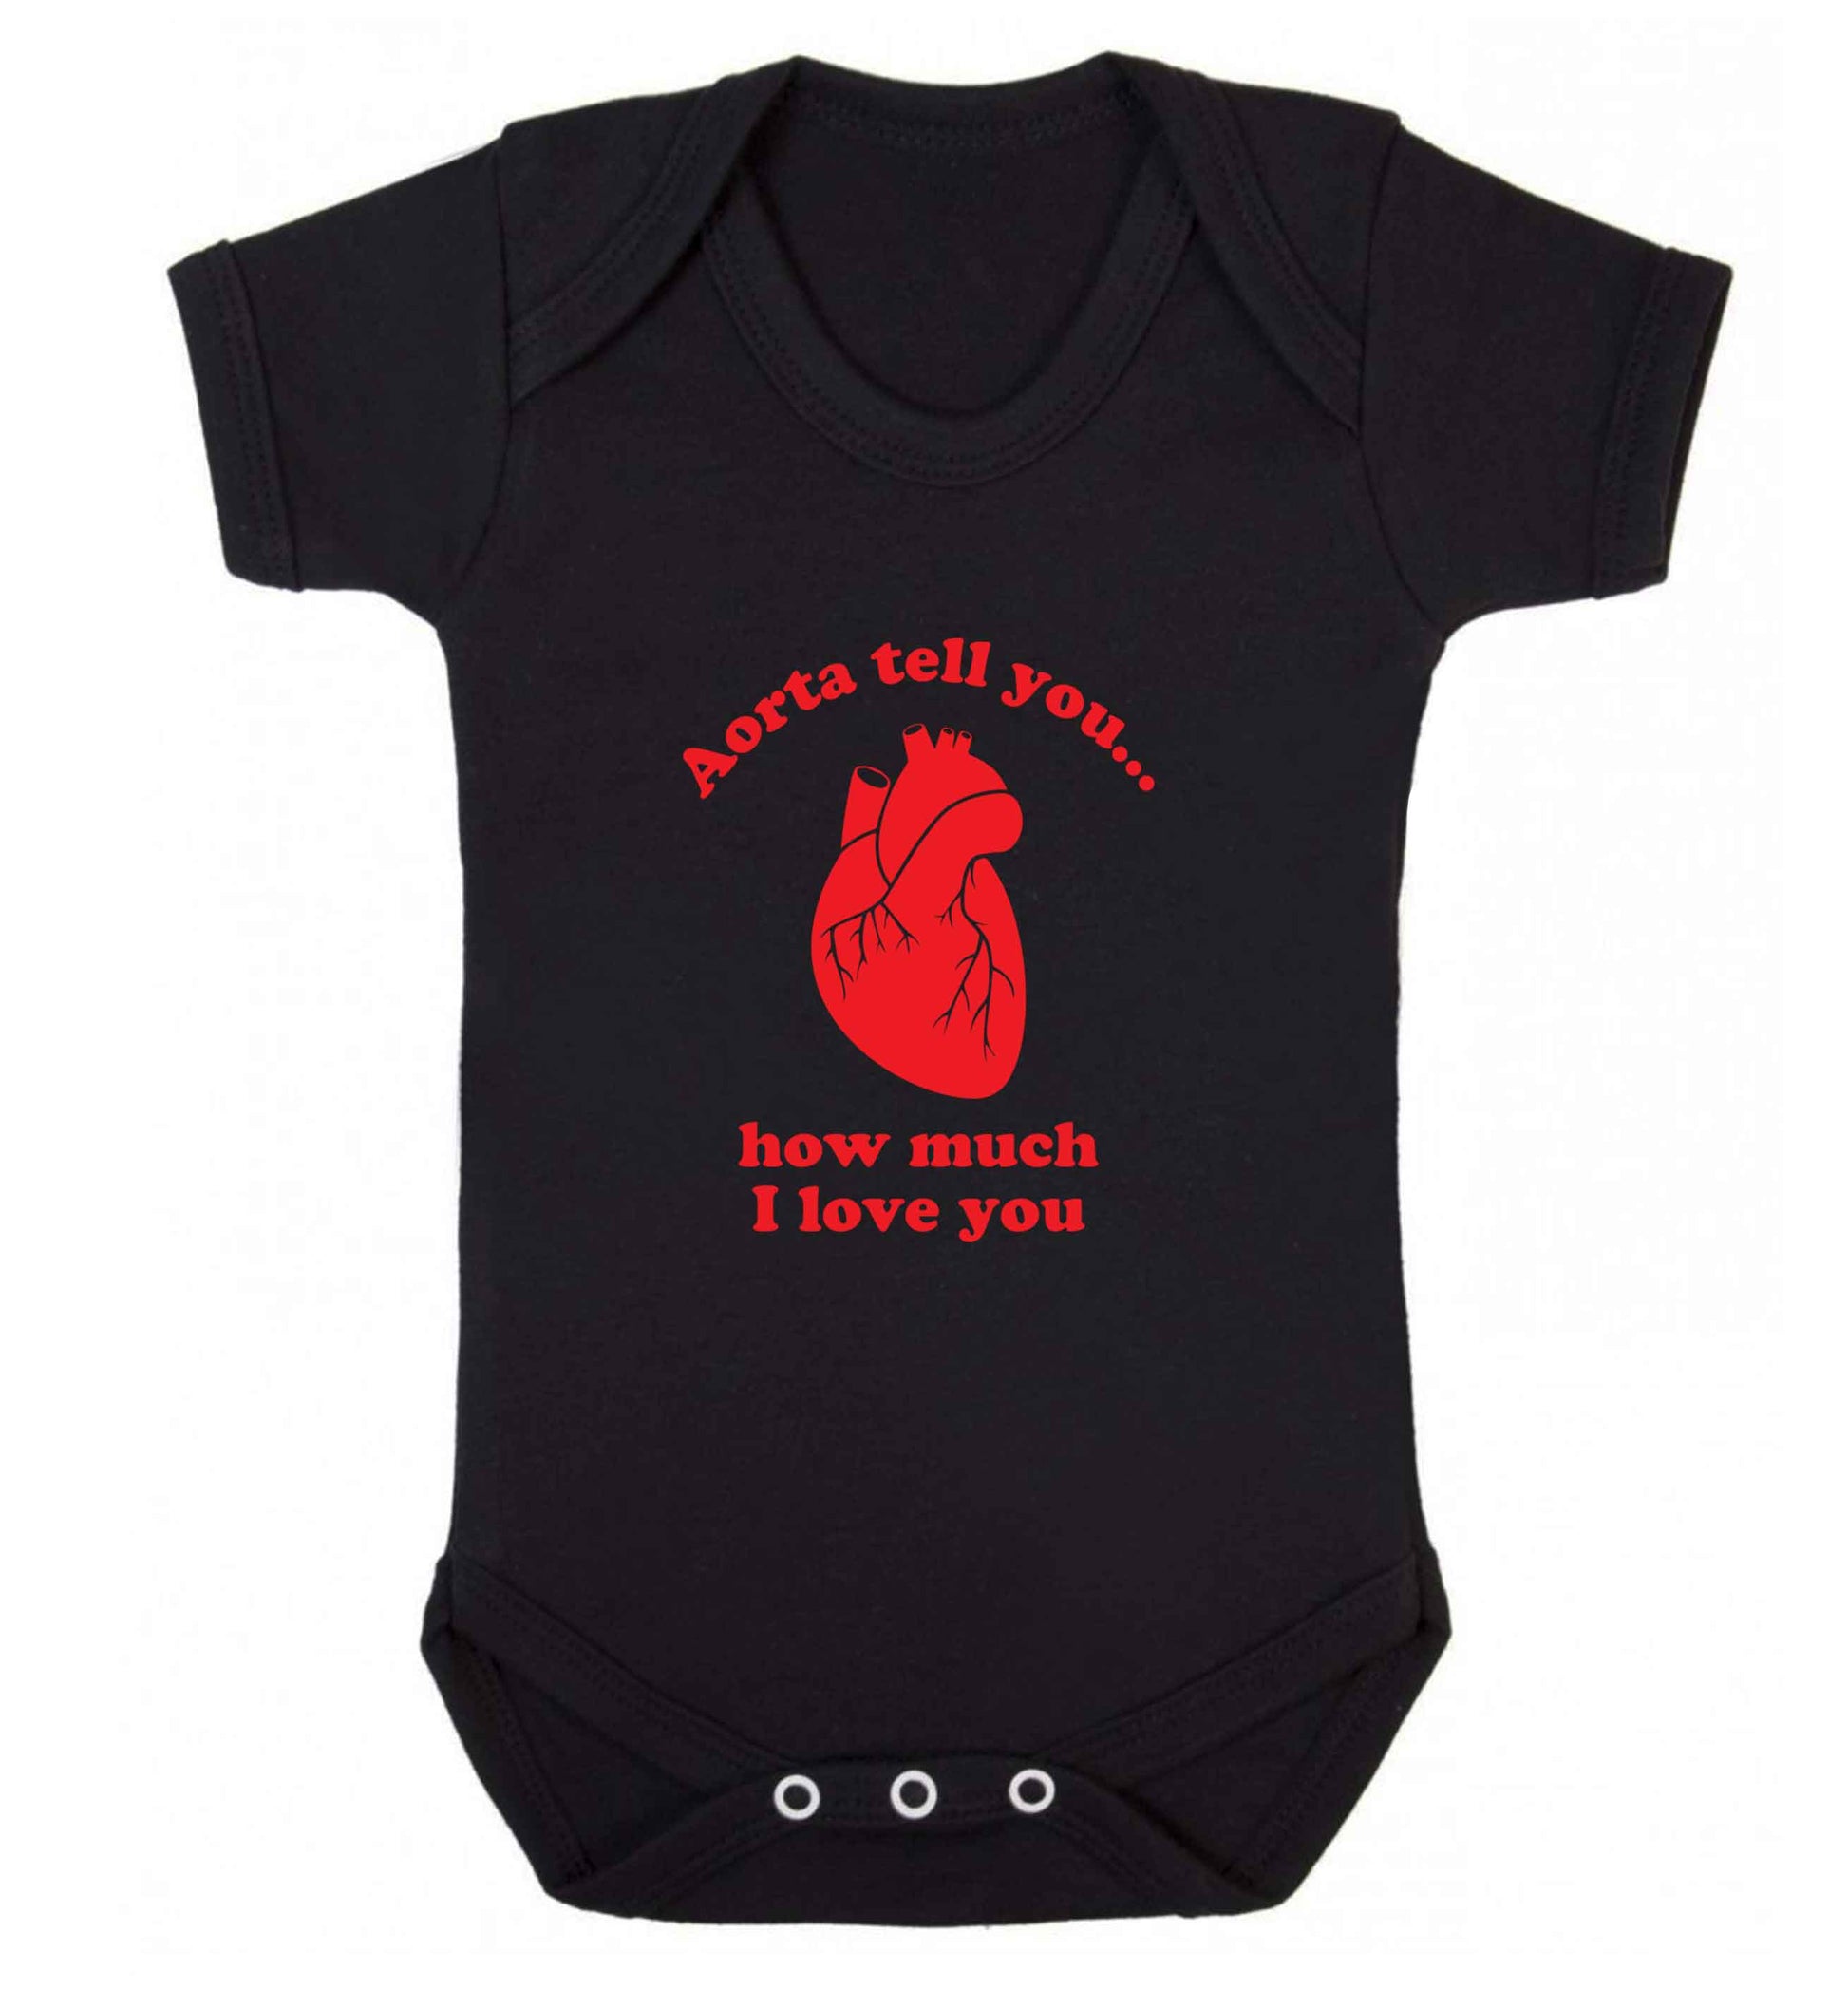 Aorta tell you how much I love you baby vest black 18-24 months